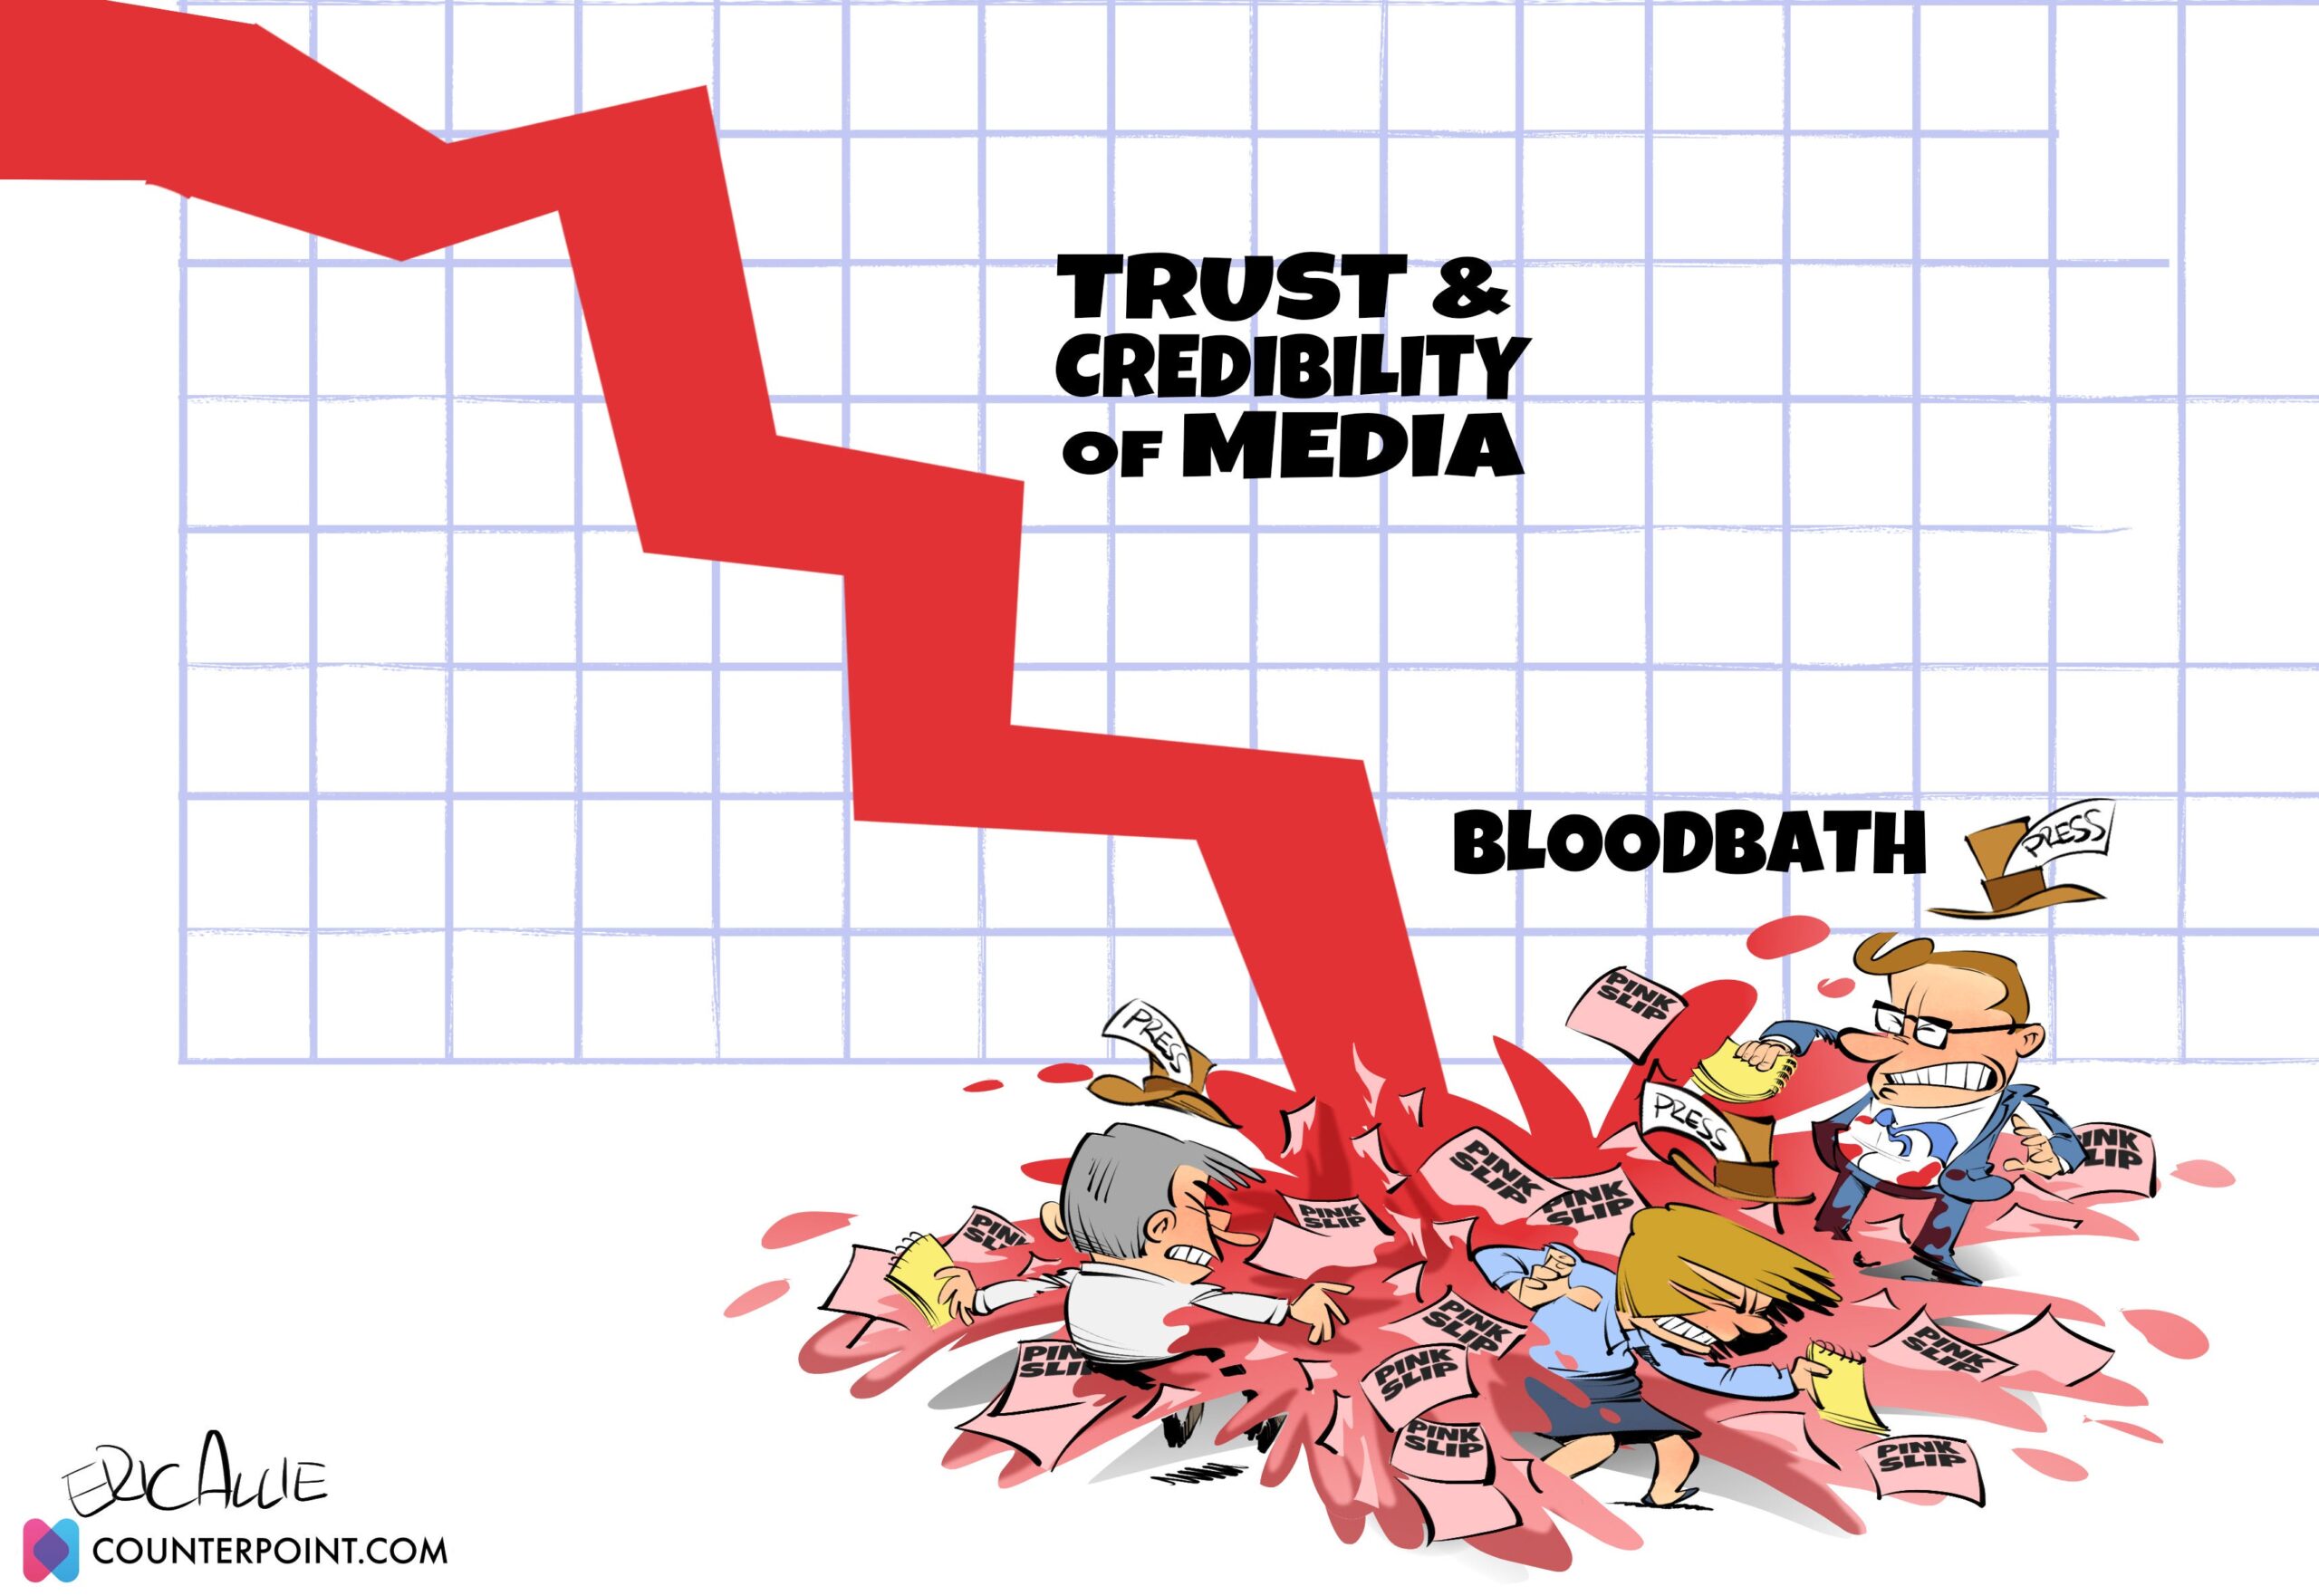 The global collapse of trust in the media